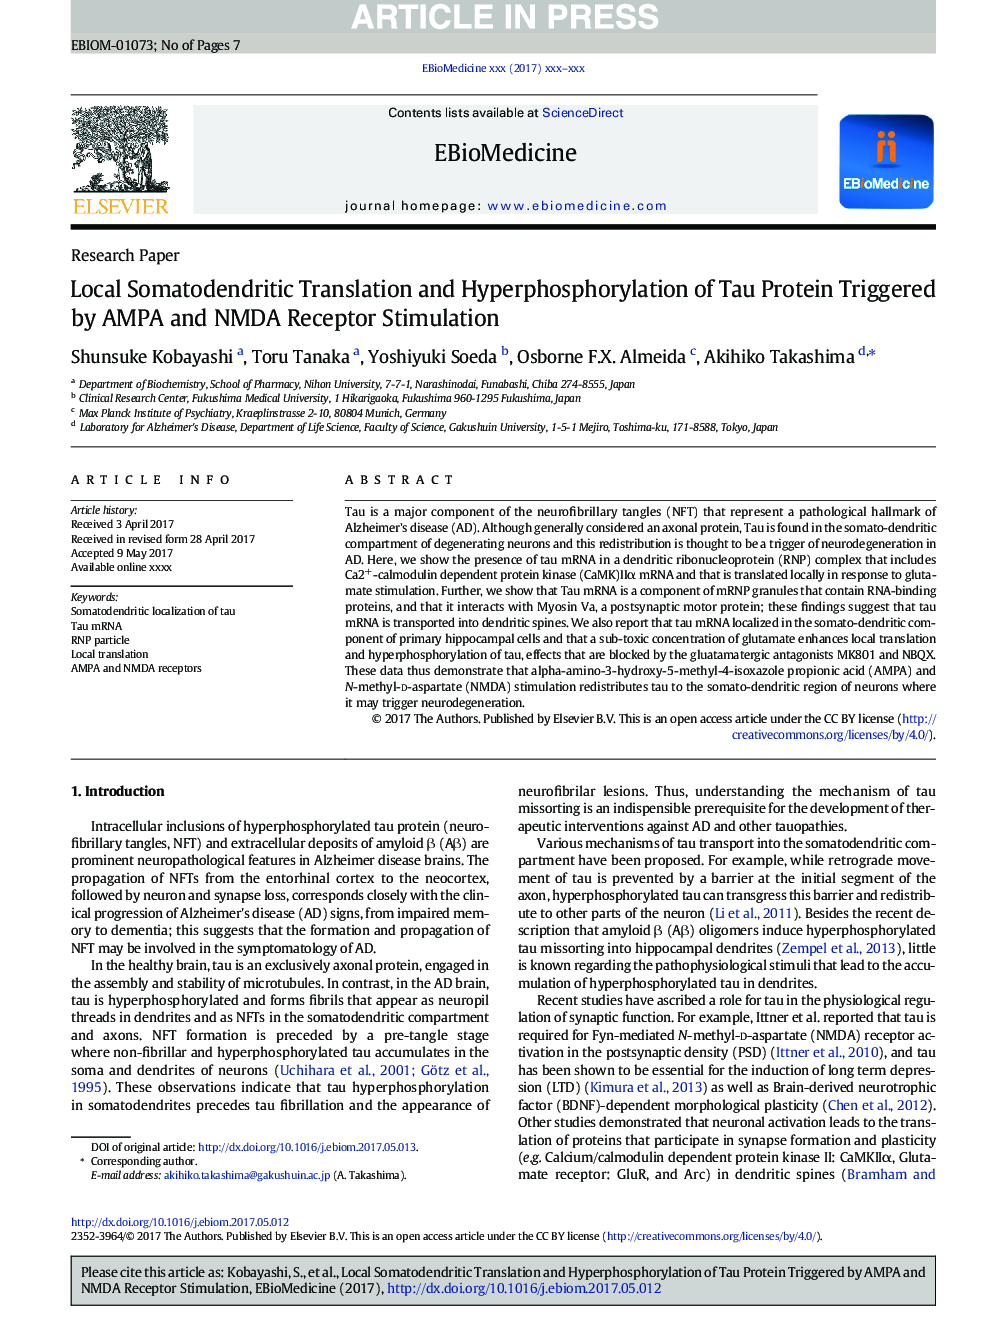 Local Somatodendritic Translation and Hyperphosphorylation of Tau Protein Triggered by AMPA and NMDA Receptor Stimulation